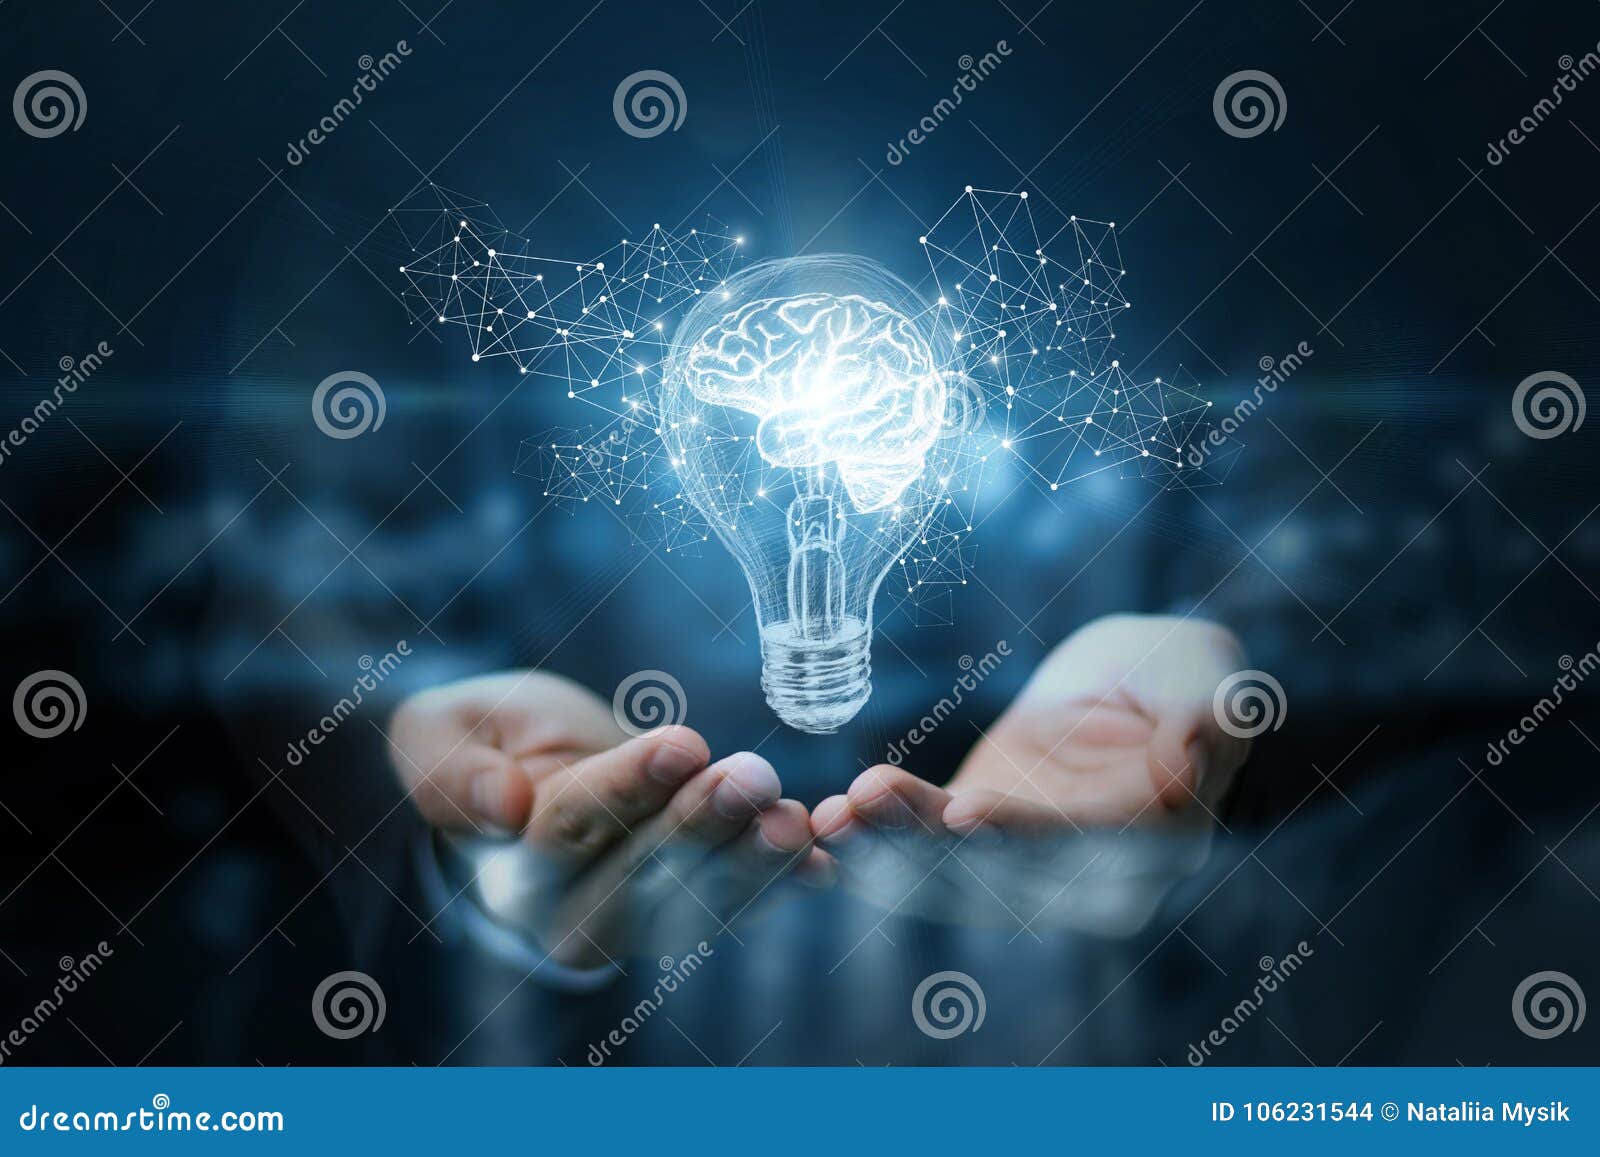 light bulb with brain inside the hands of the businessman.